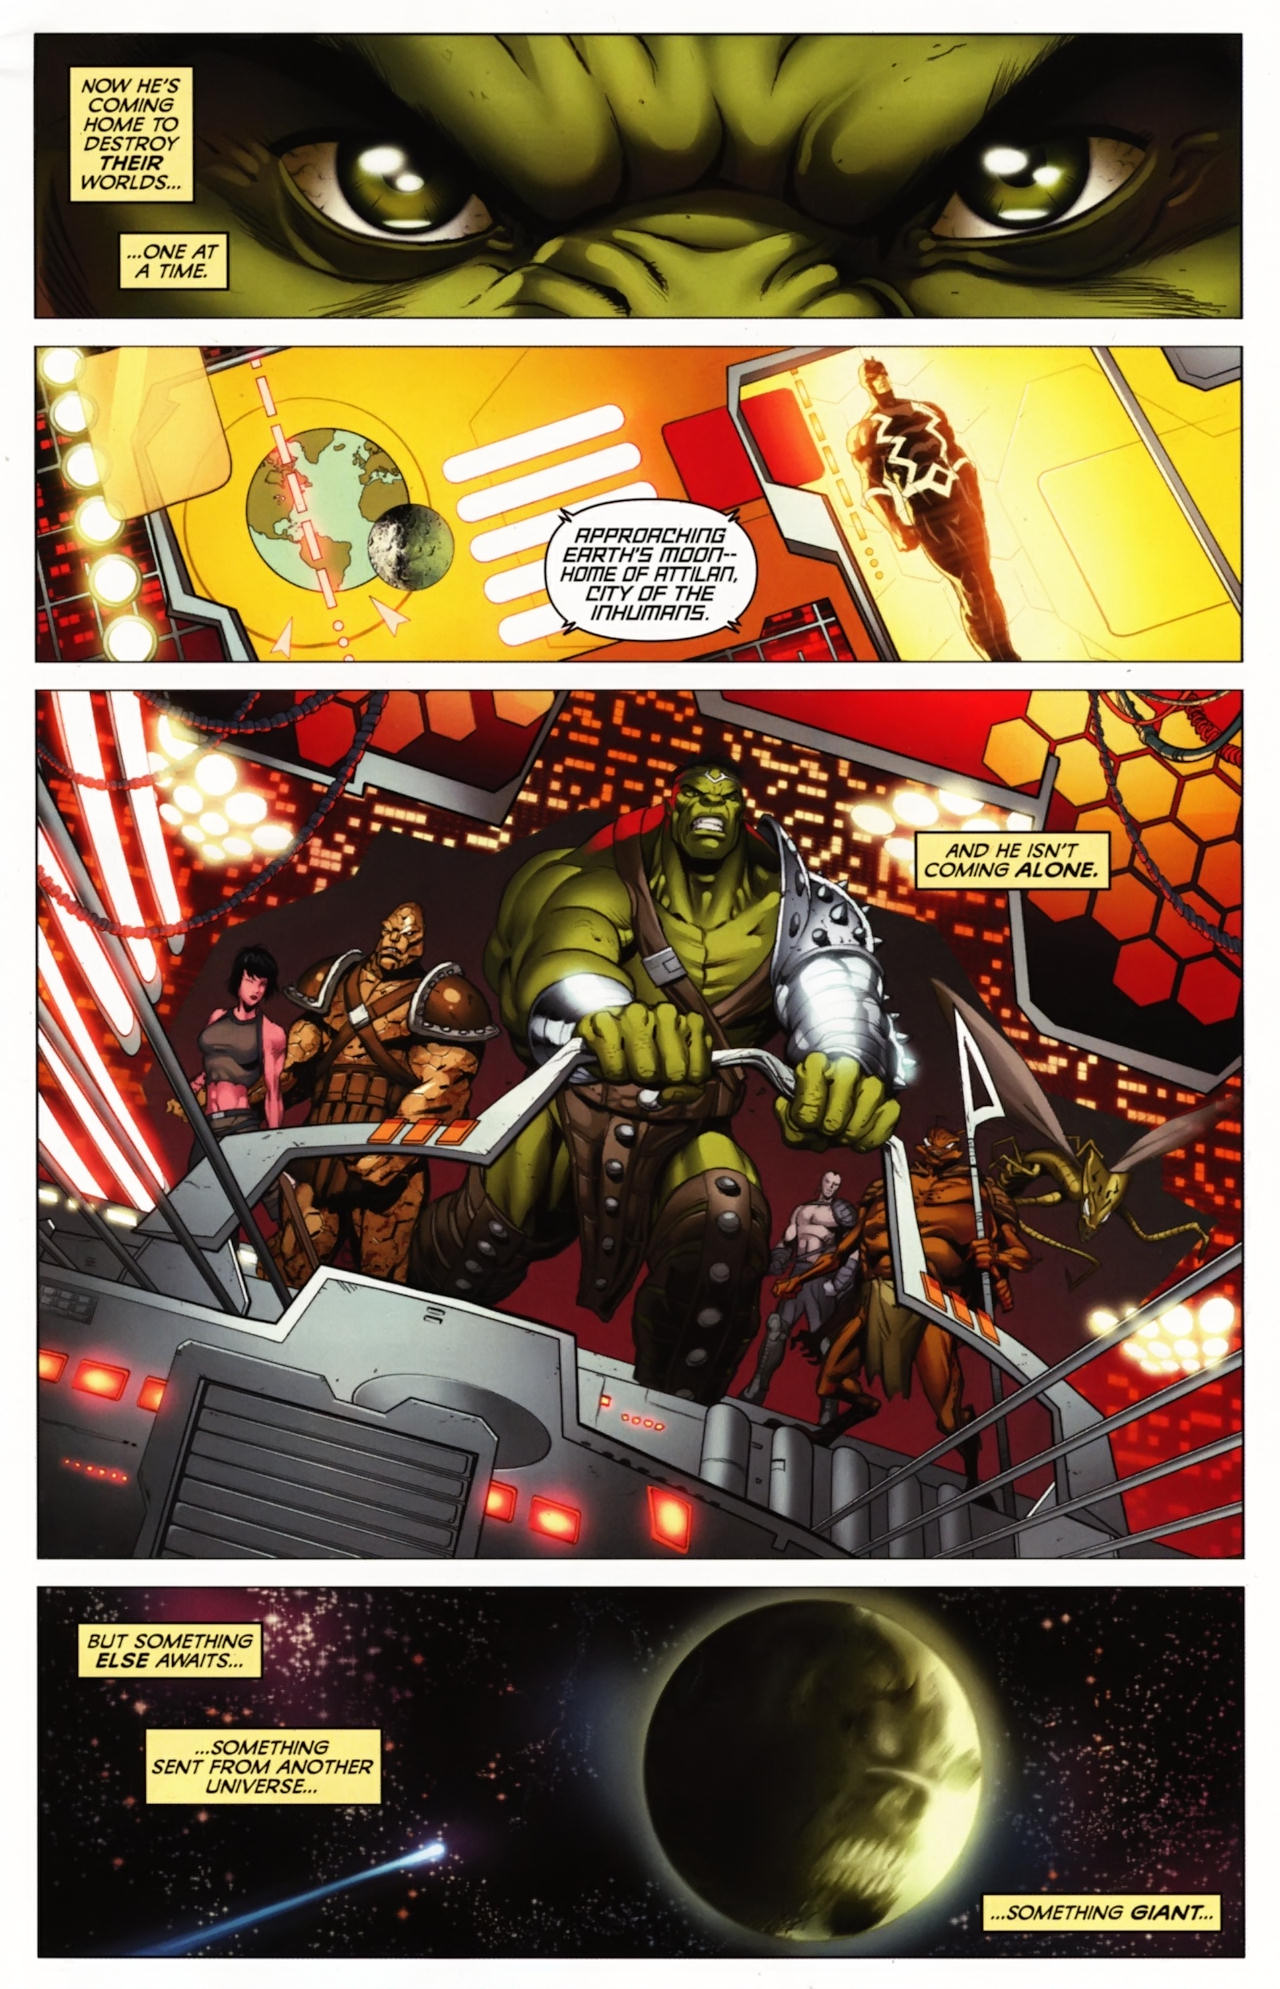 Marvel Zombies - The Return 04 of 05